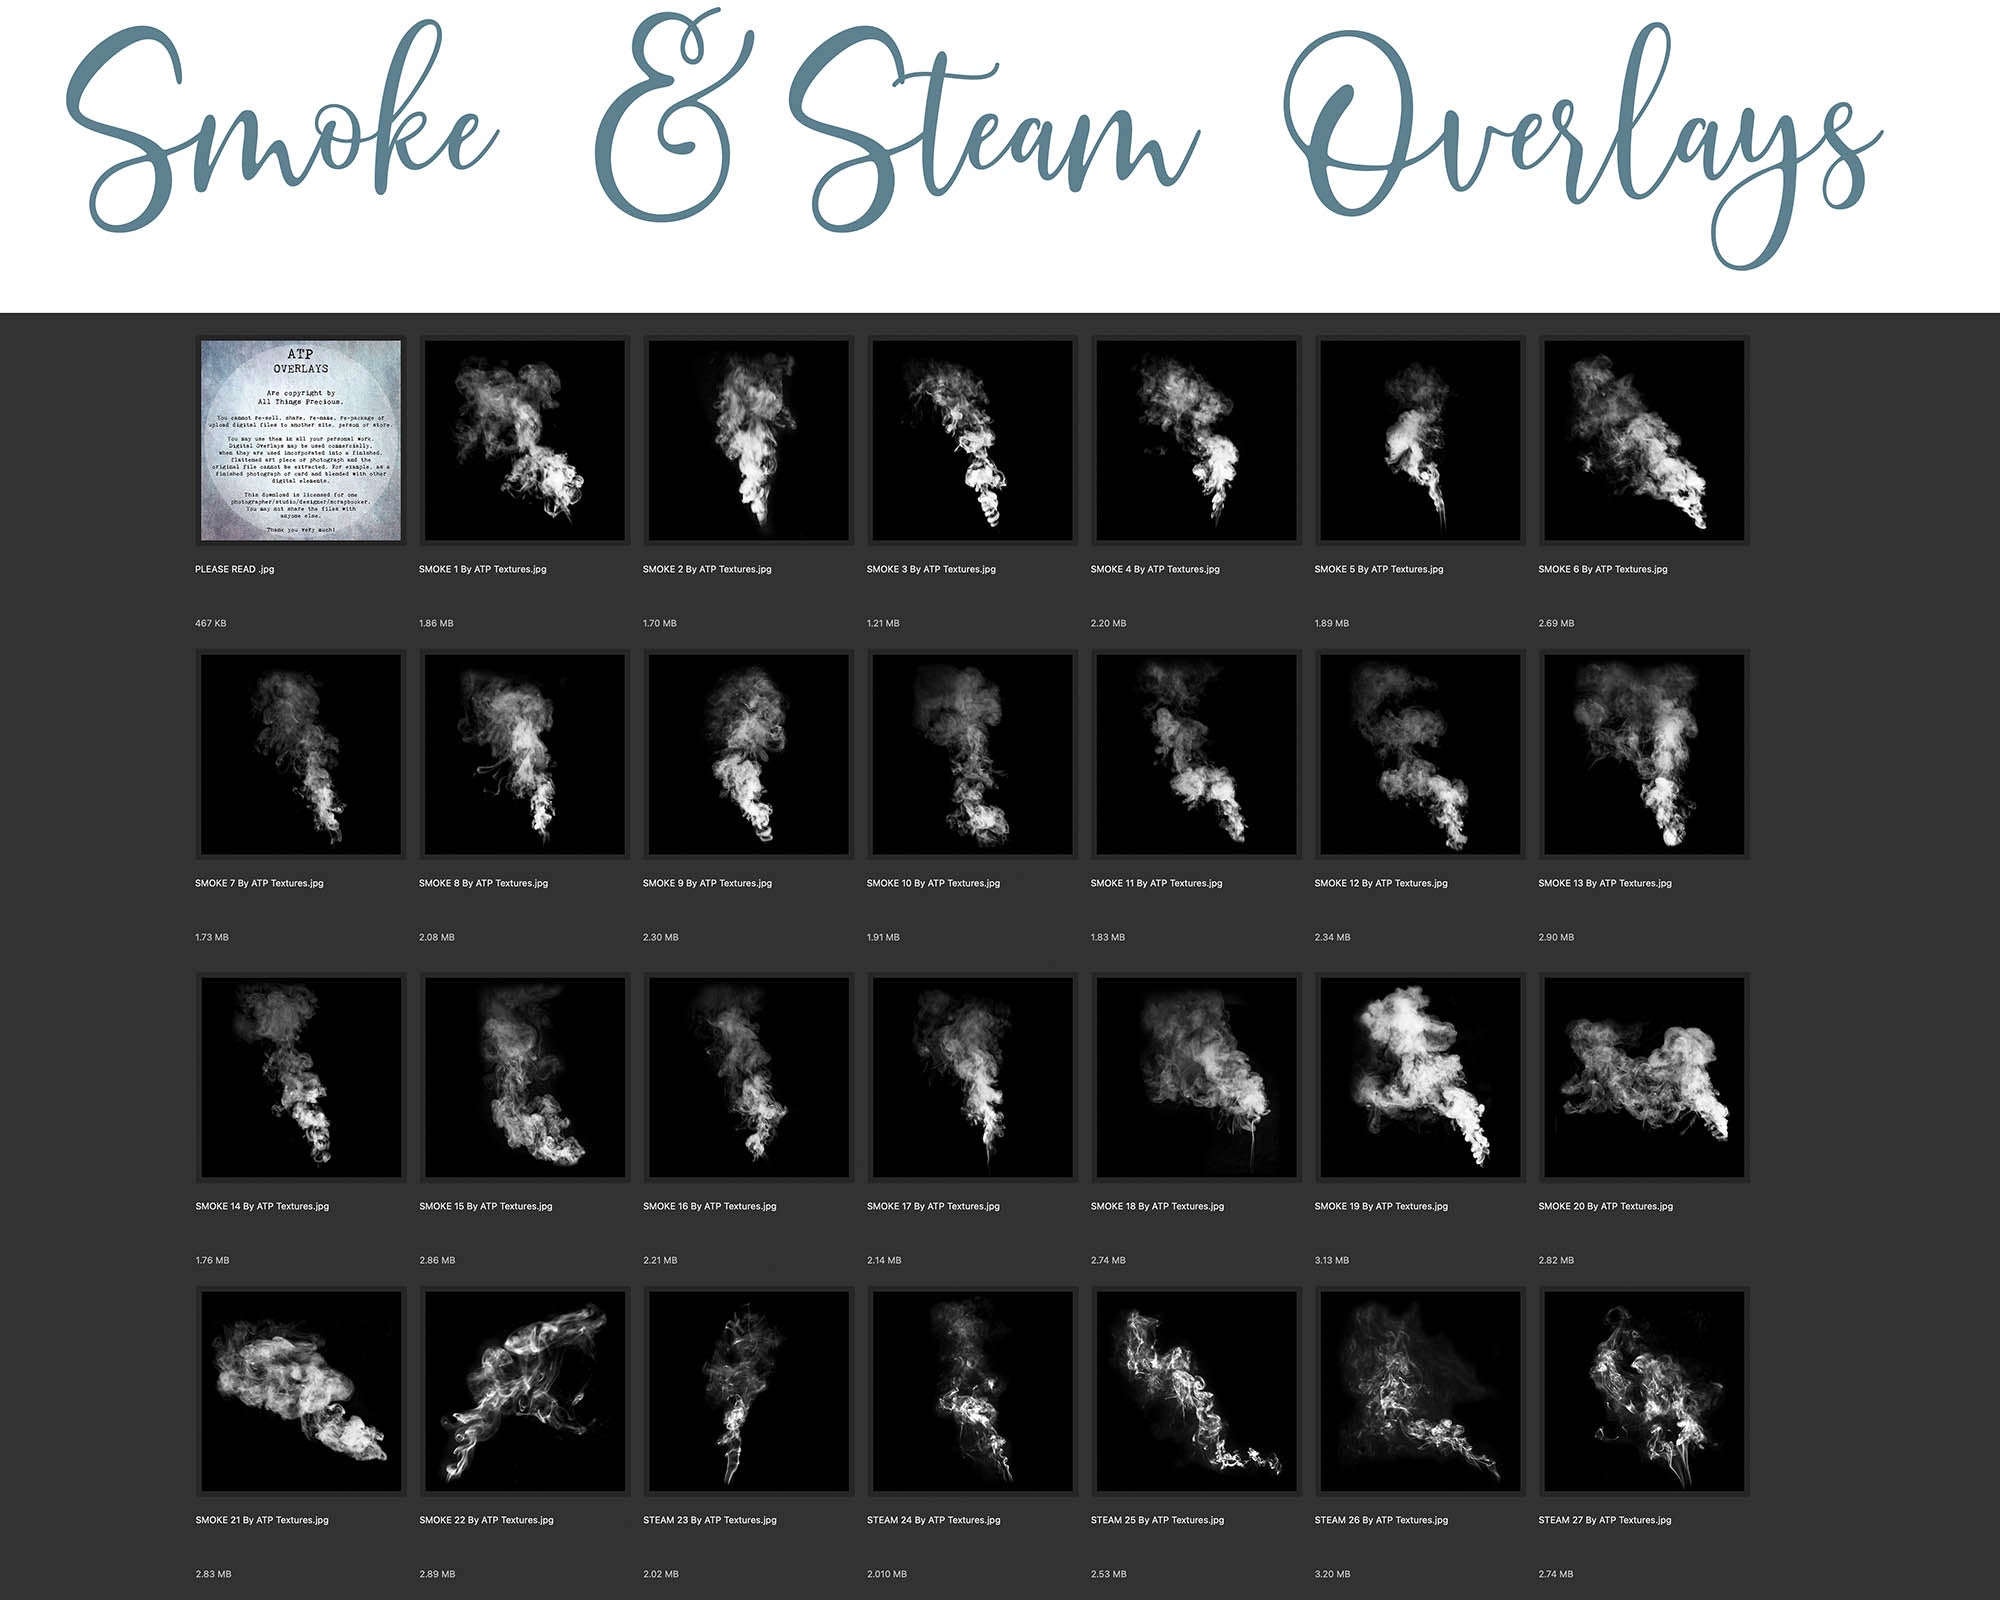 Smoke and Steam Overlays &Brushes! Photoshop brushes with png clipart overlays for photography and digital design. Digital Stamps for scrapbooking, photography and graphic design. Assets and Add ons. High resolution digital files. ATP Textures